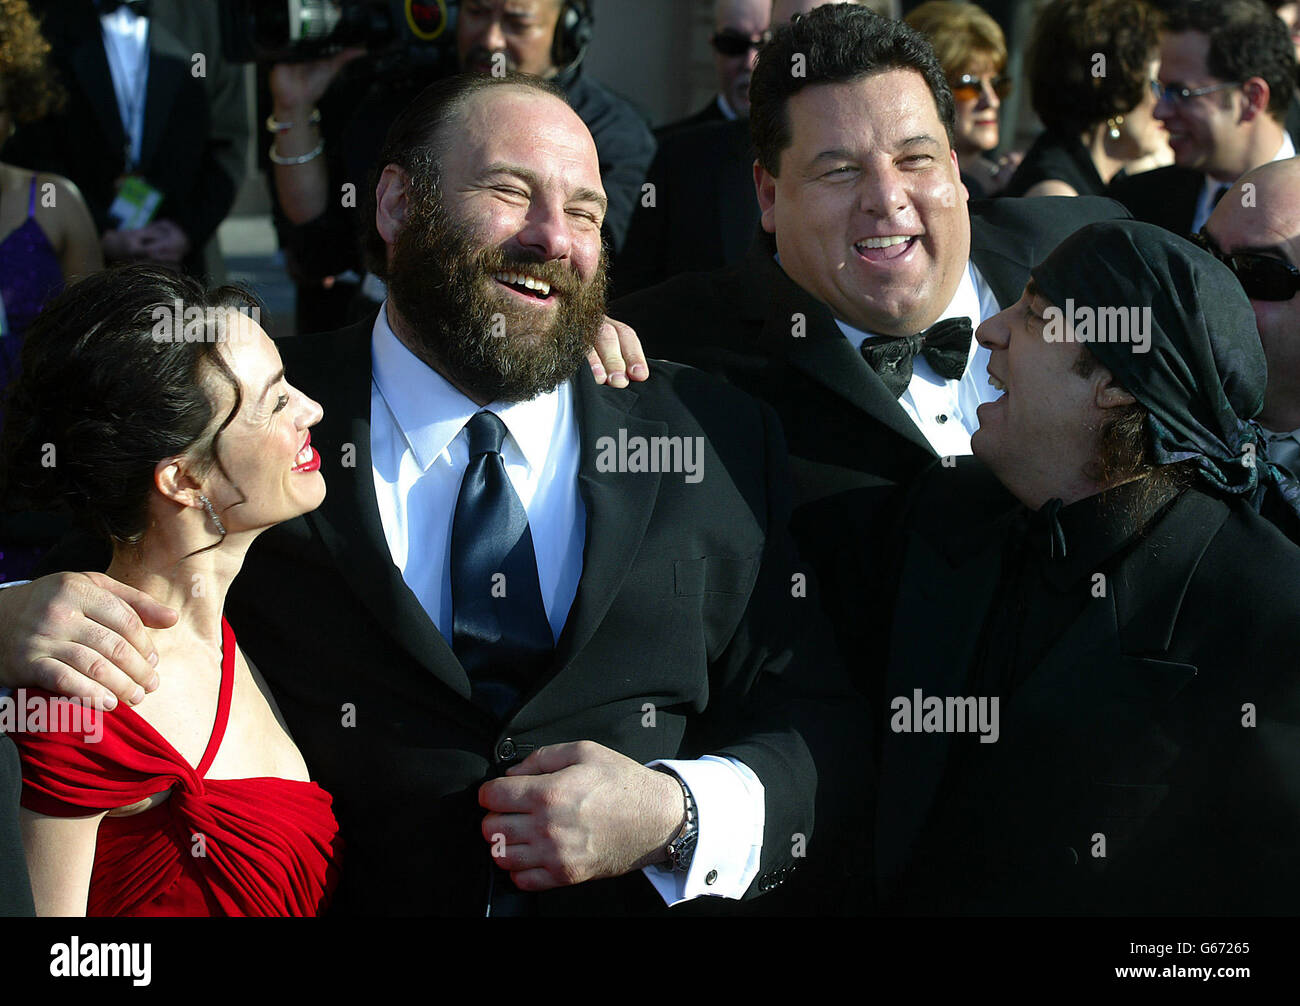 Sopranos actor James Gandolfini (second from left) shares a laugh on the red carpet with co-stars Steve R. Schirripa and Steven Van Zandt, at the 9th annual Screen Actors Guild Awards at the Shrine Auditorium in Los Angeles. Stock Photo